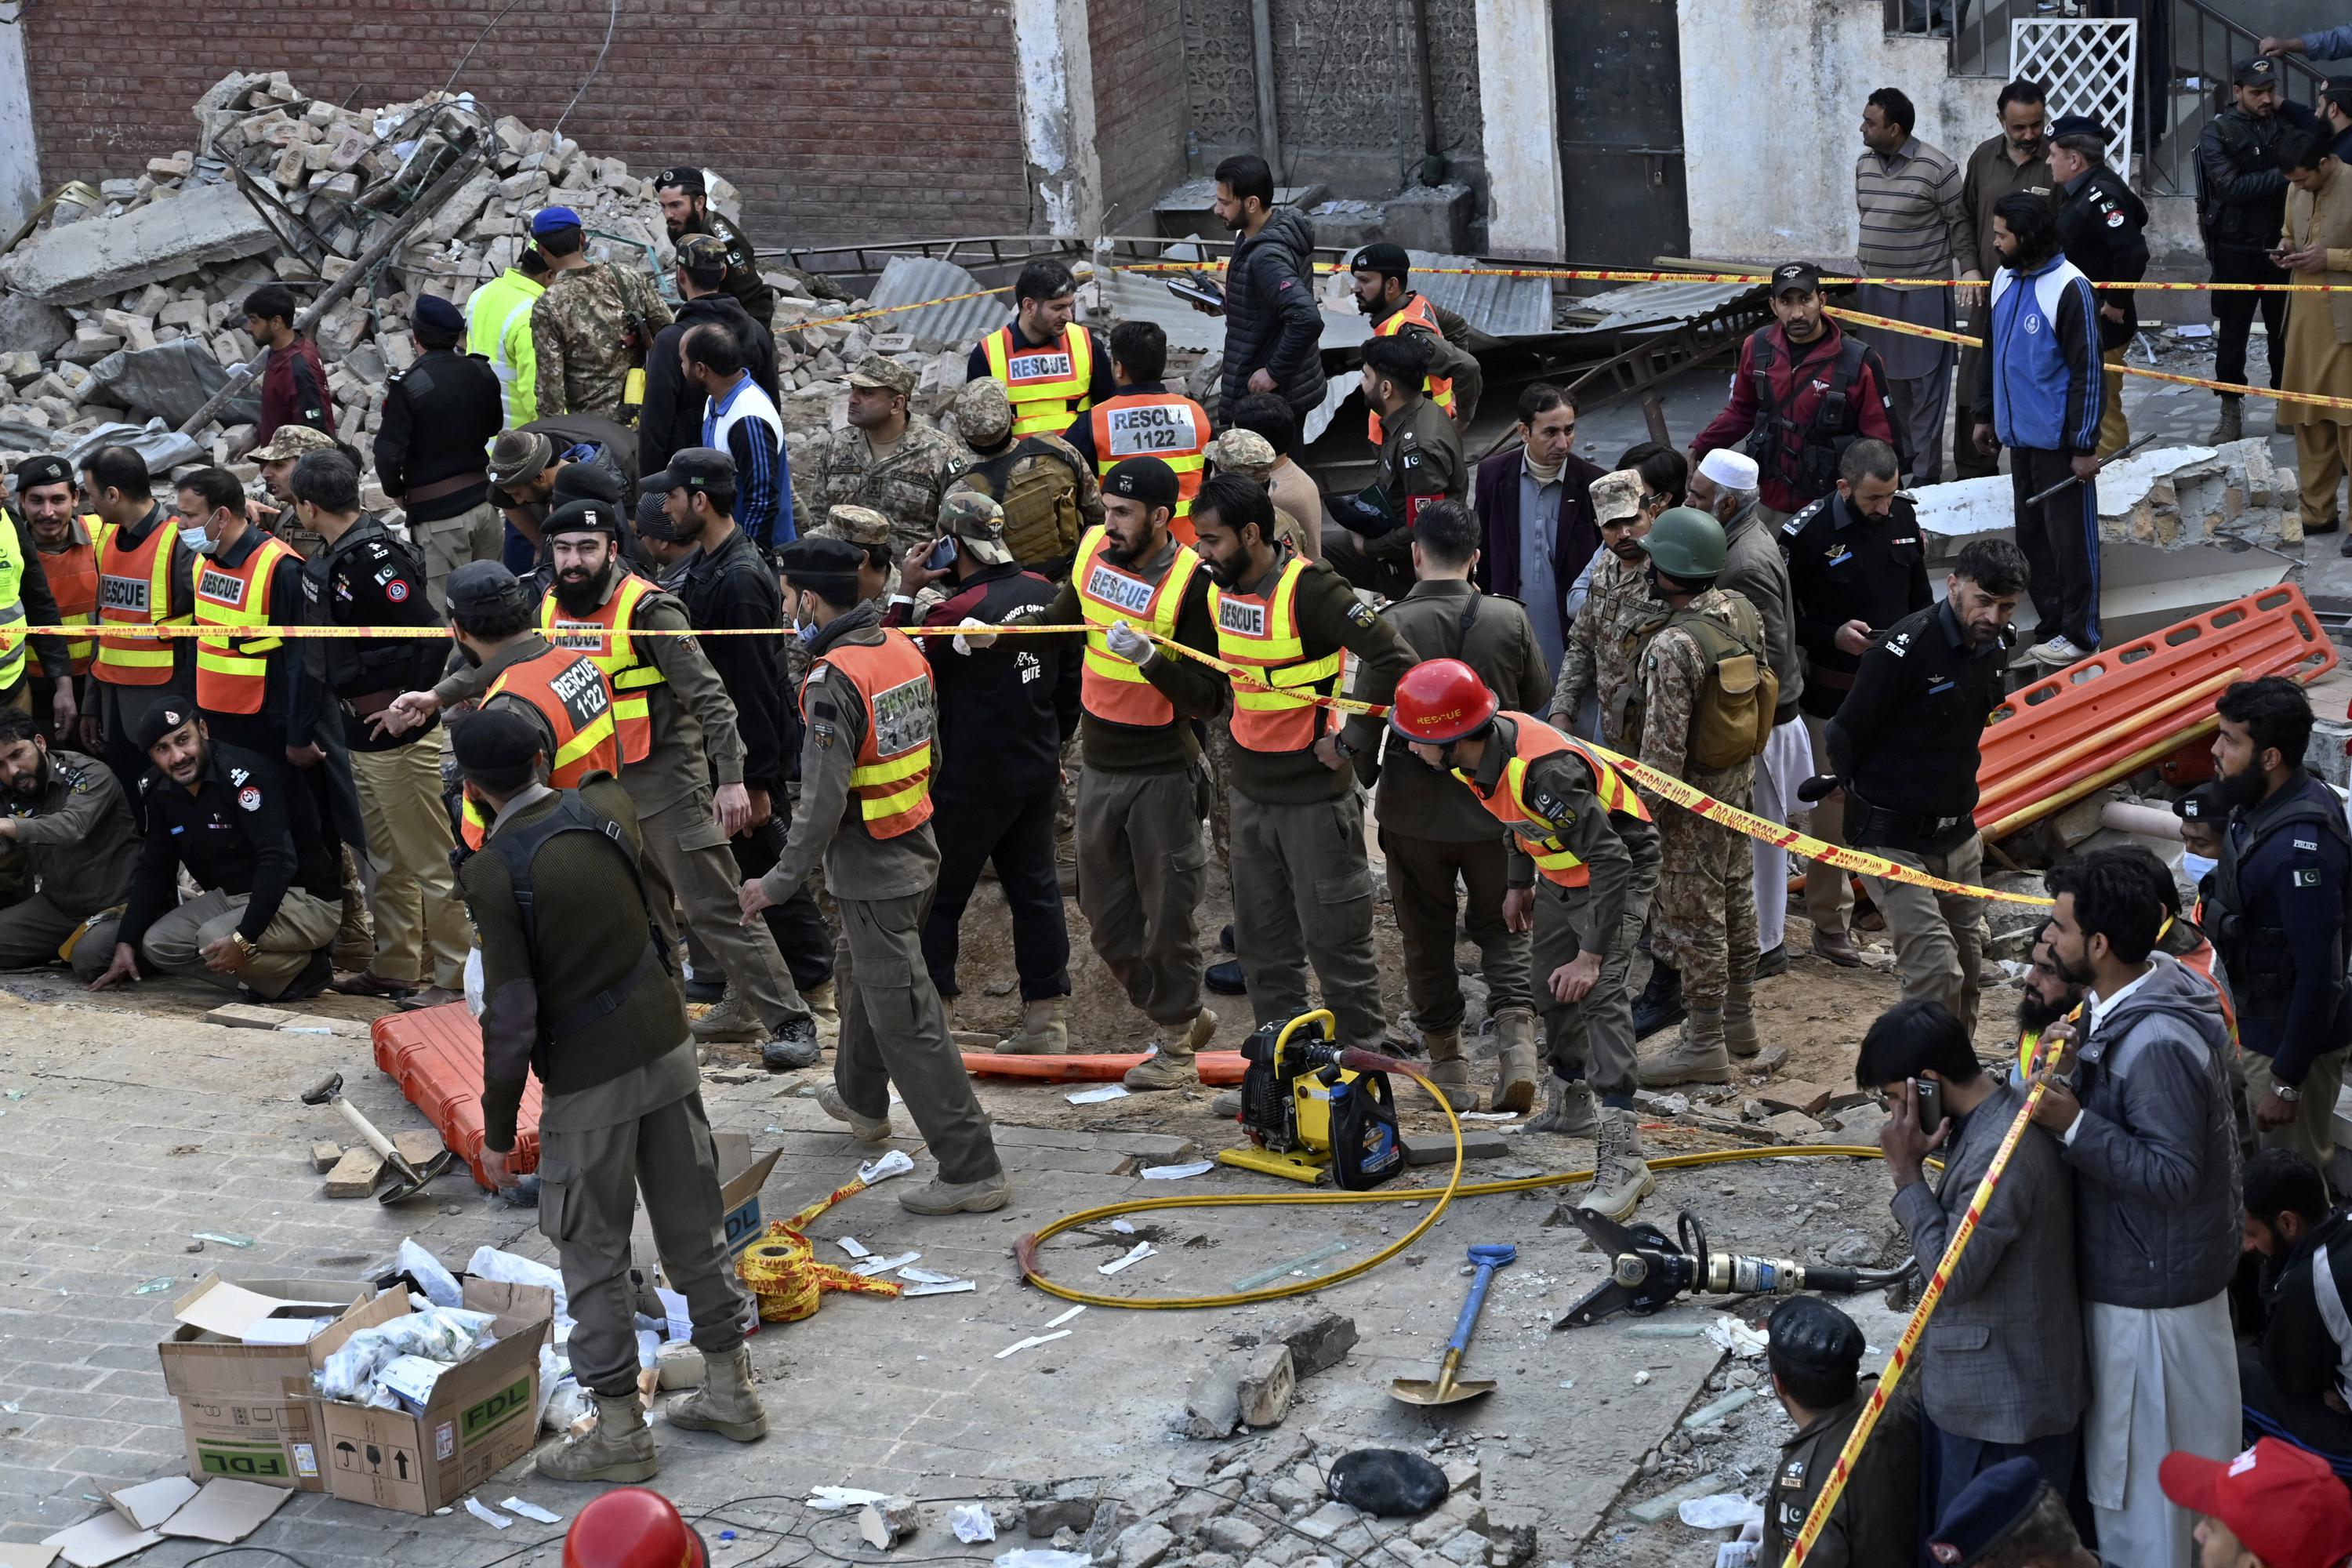 Suicide bomber kills 34, wounds 150 at mosque in NW Pakistan